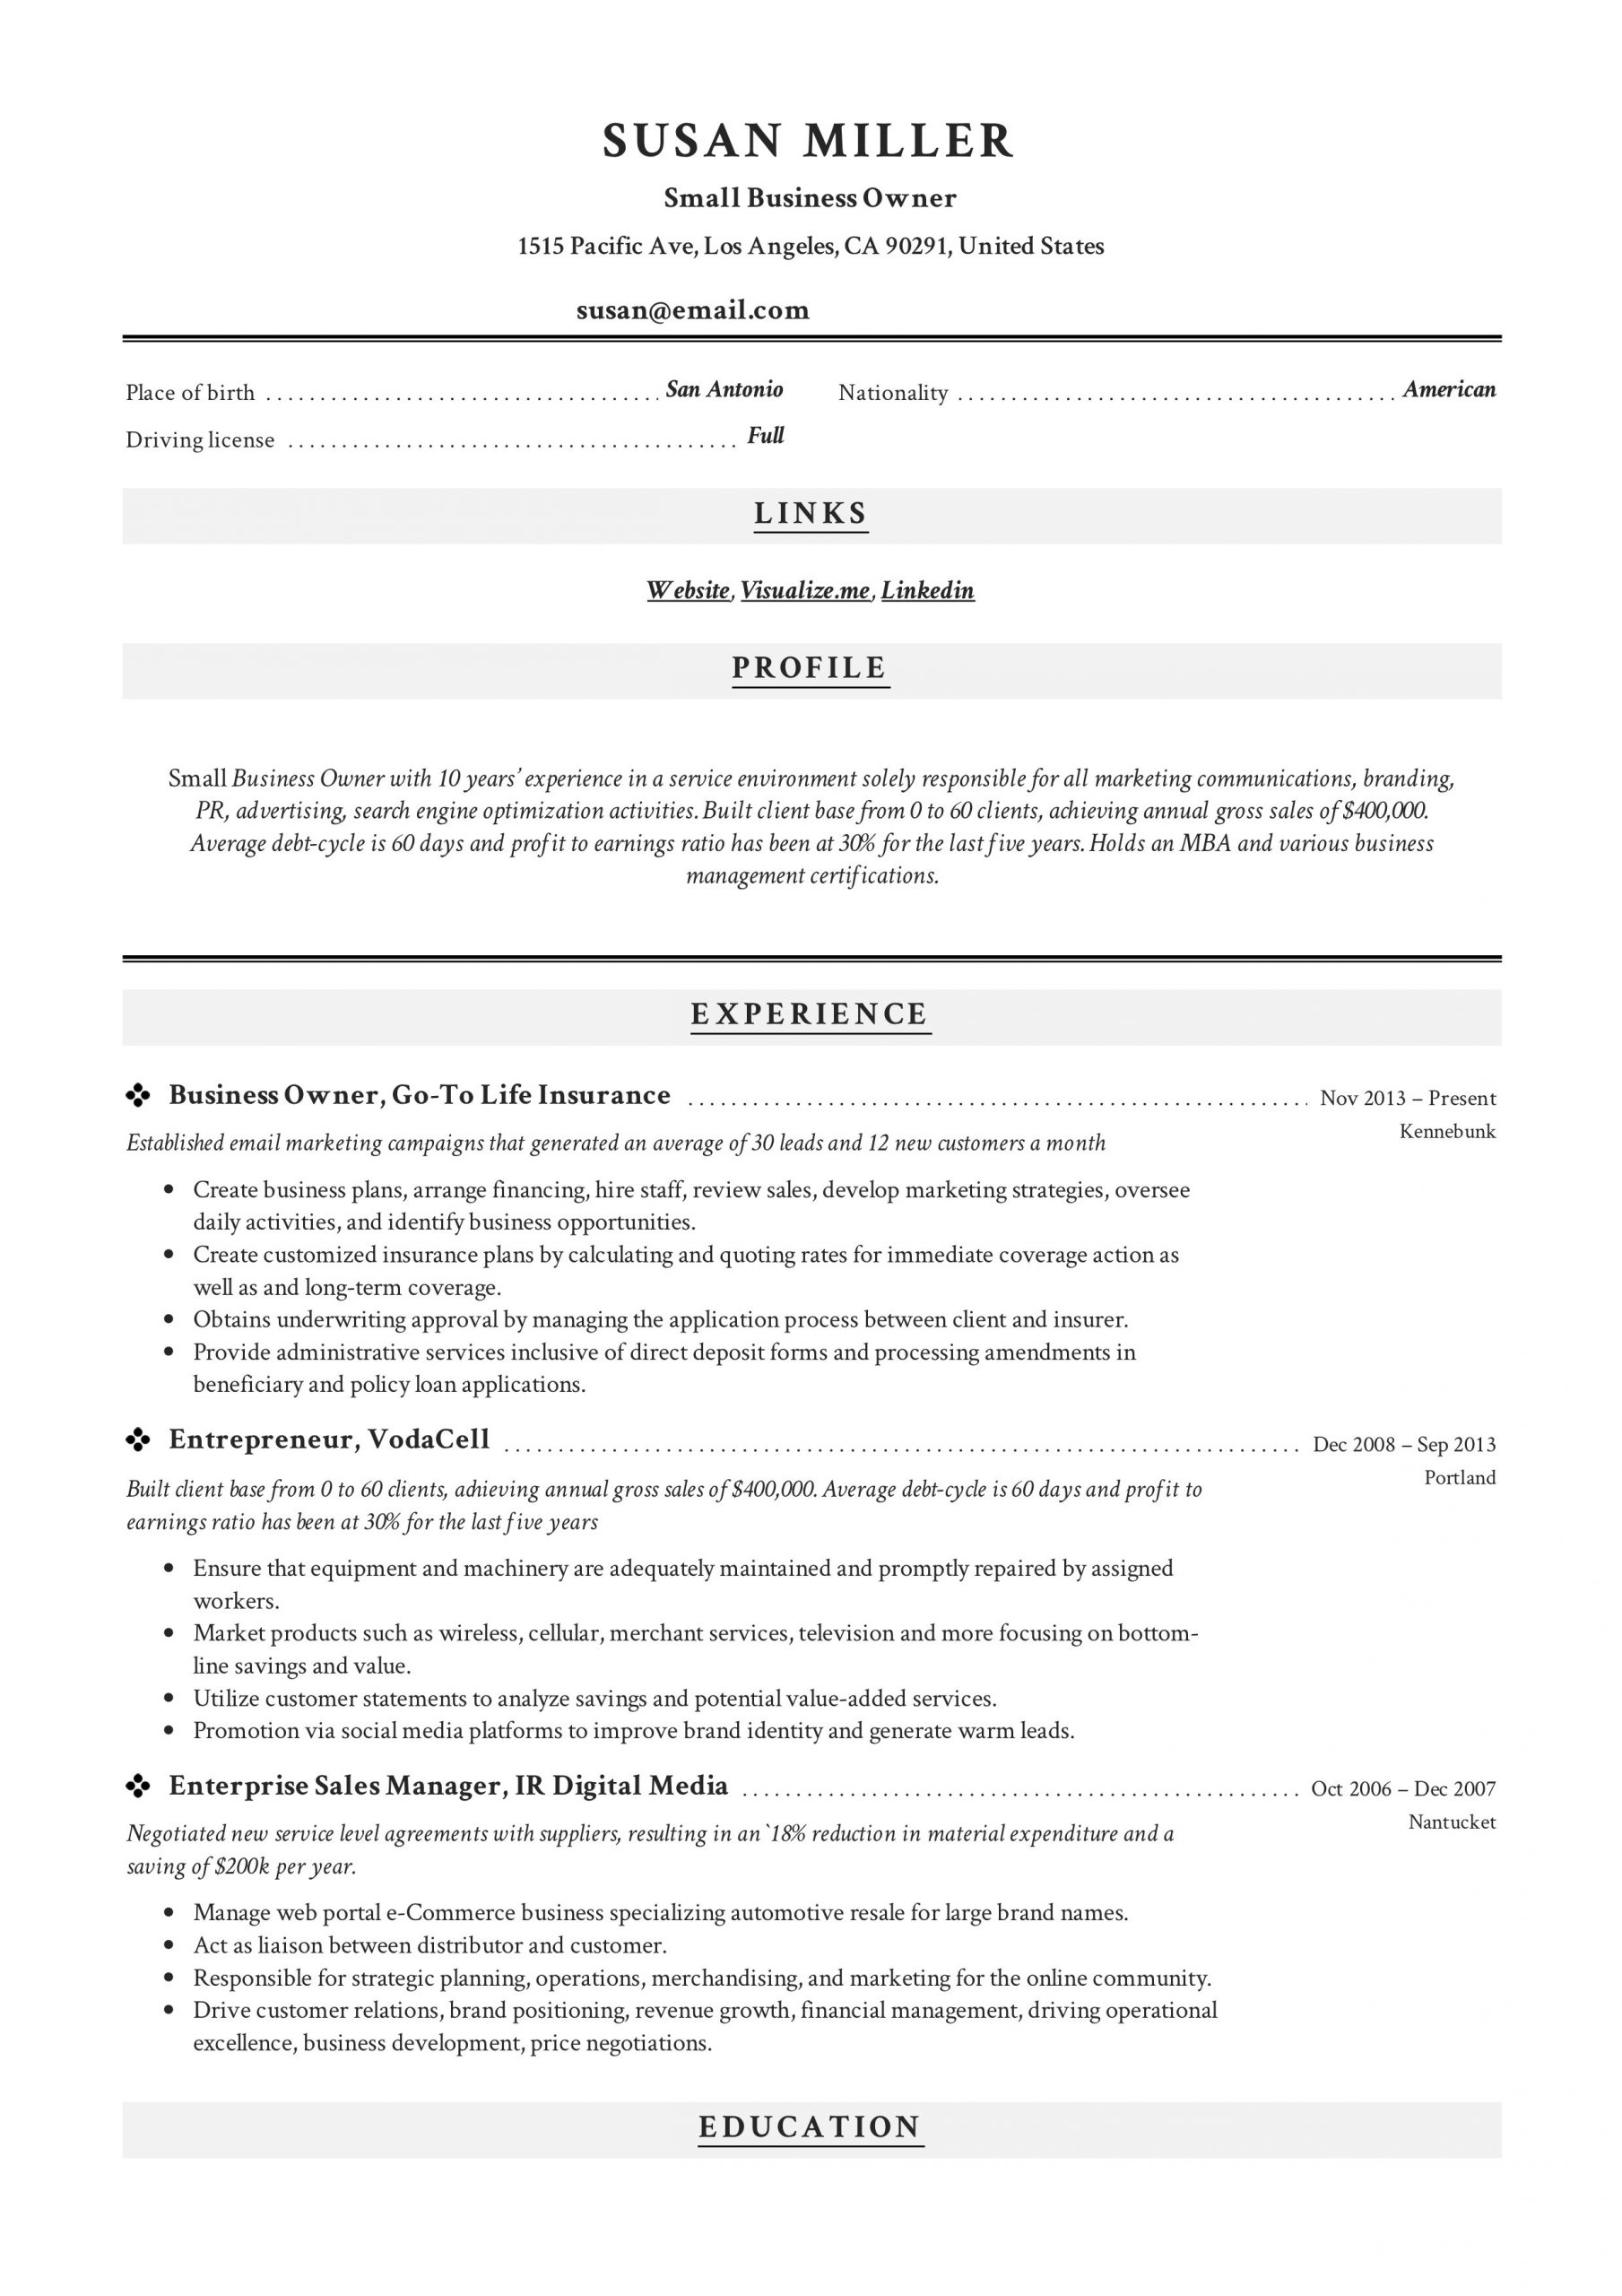 Sample Resume for Business Loan Application Small Business Owner Resume Guide  19 Examples Pdf 2020